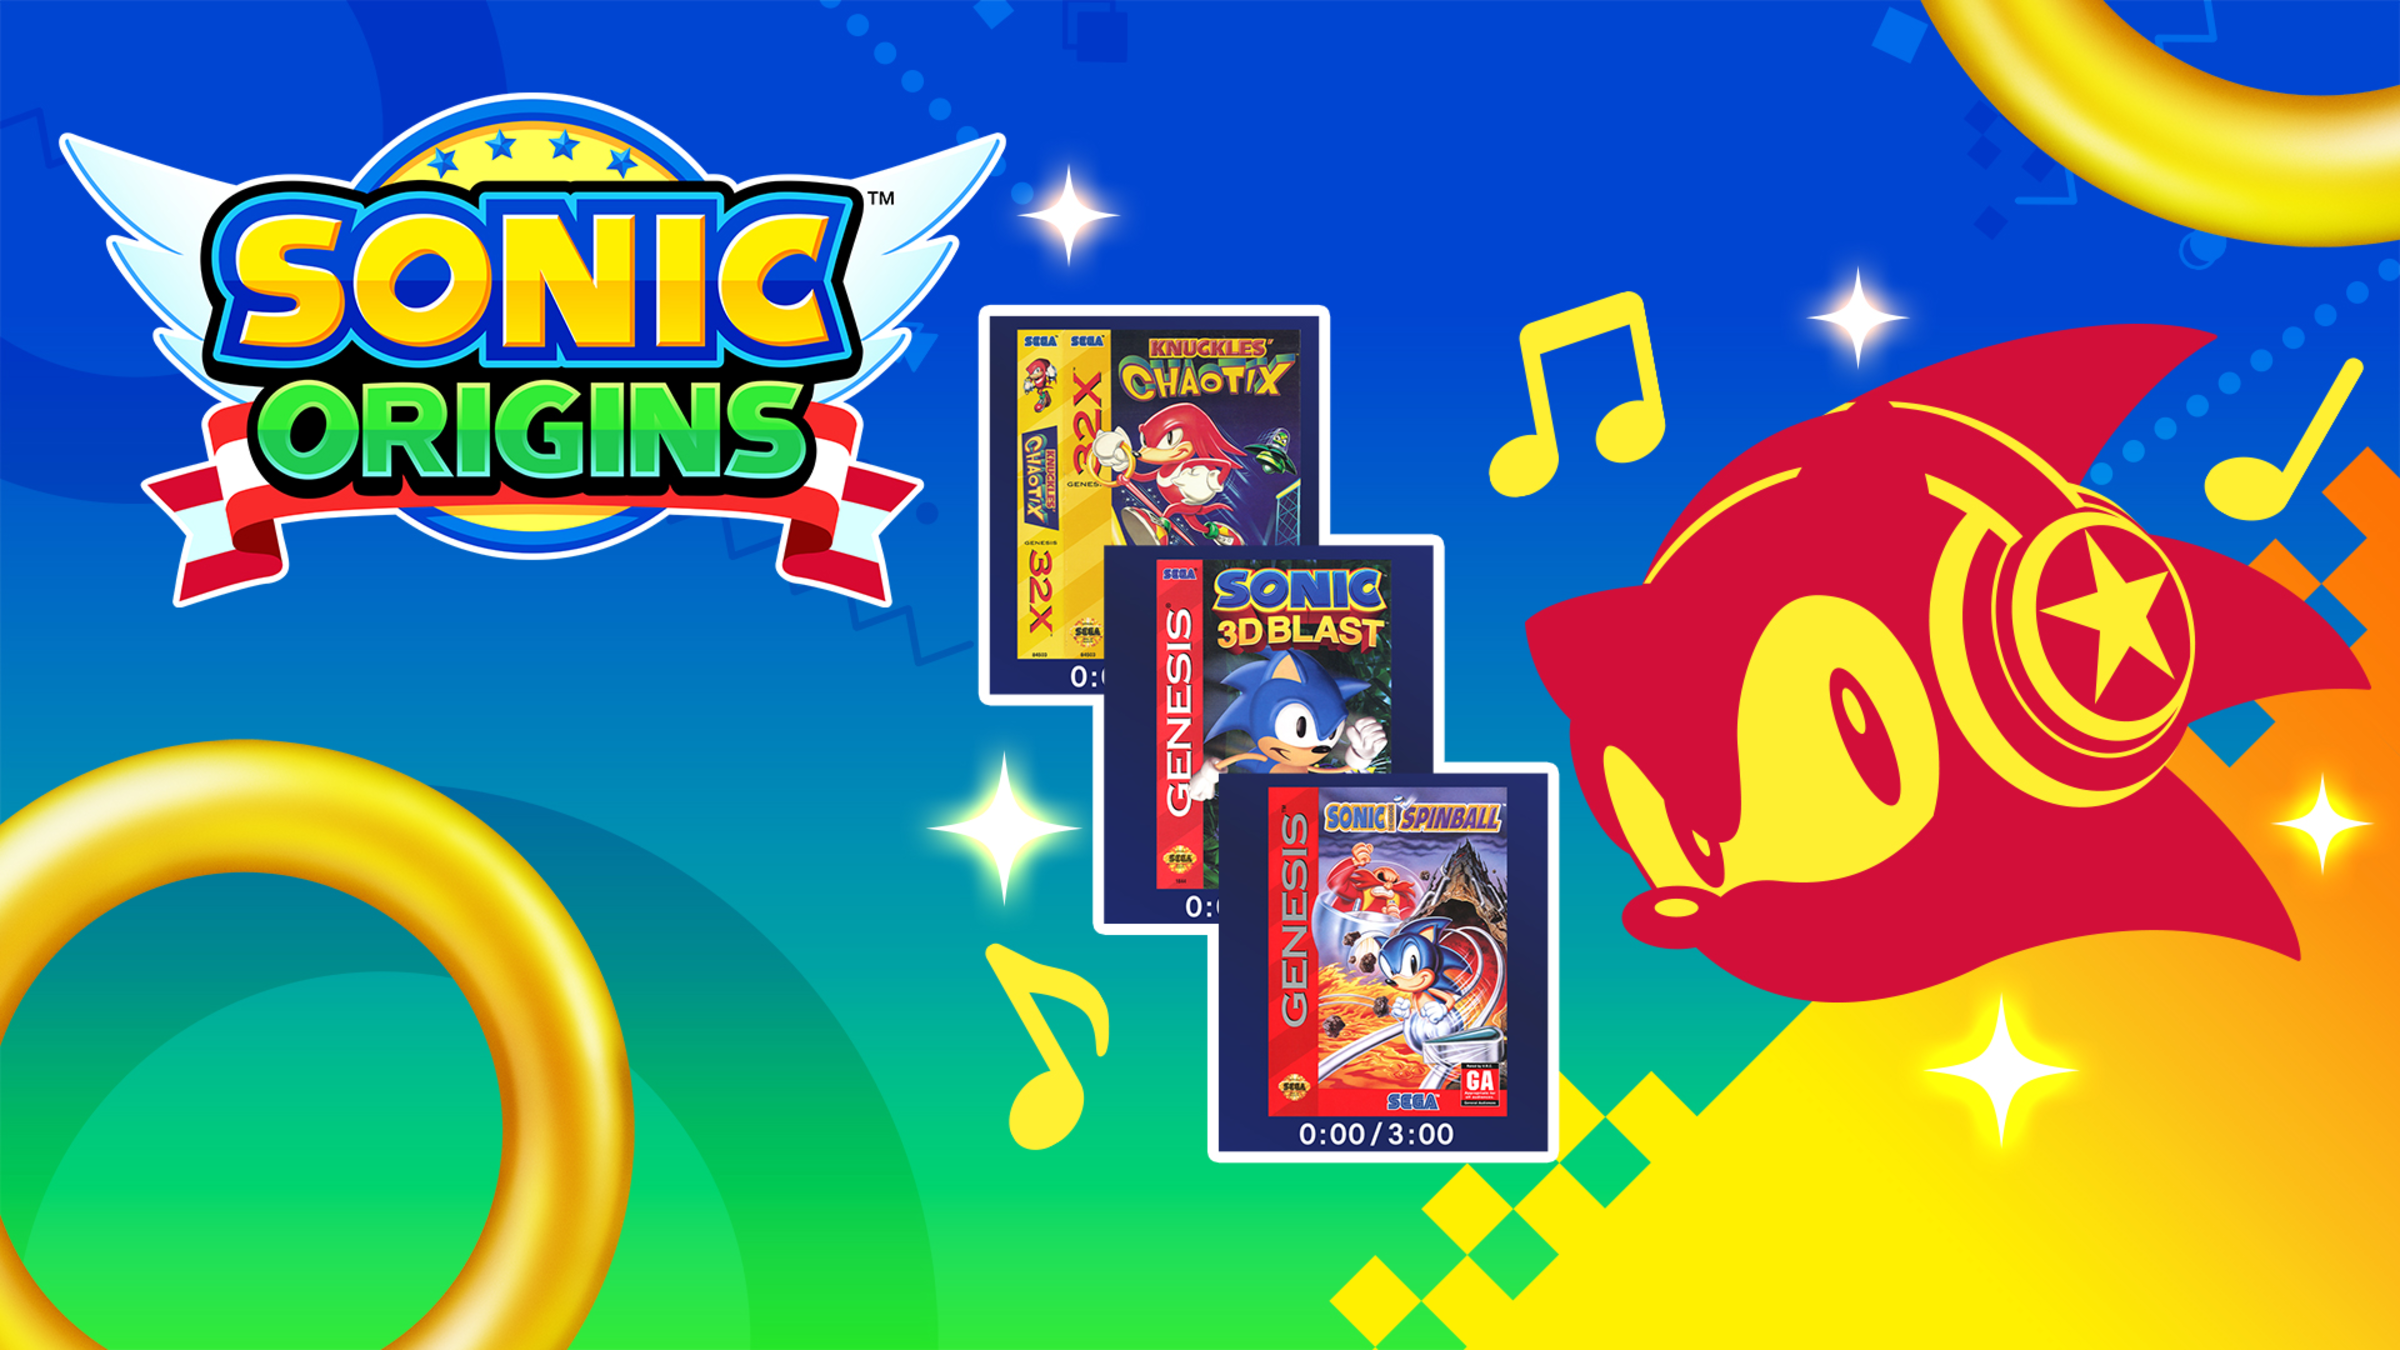 Play Sonic in chaotix for free without downloads